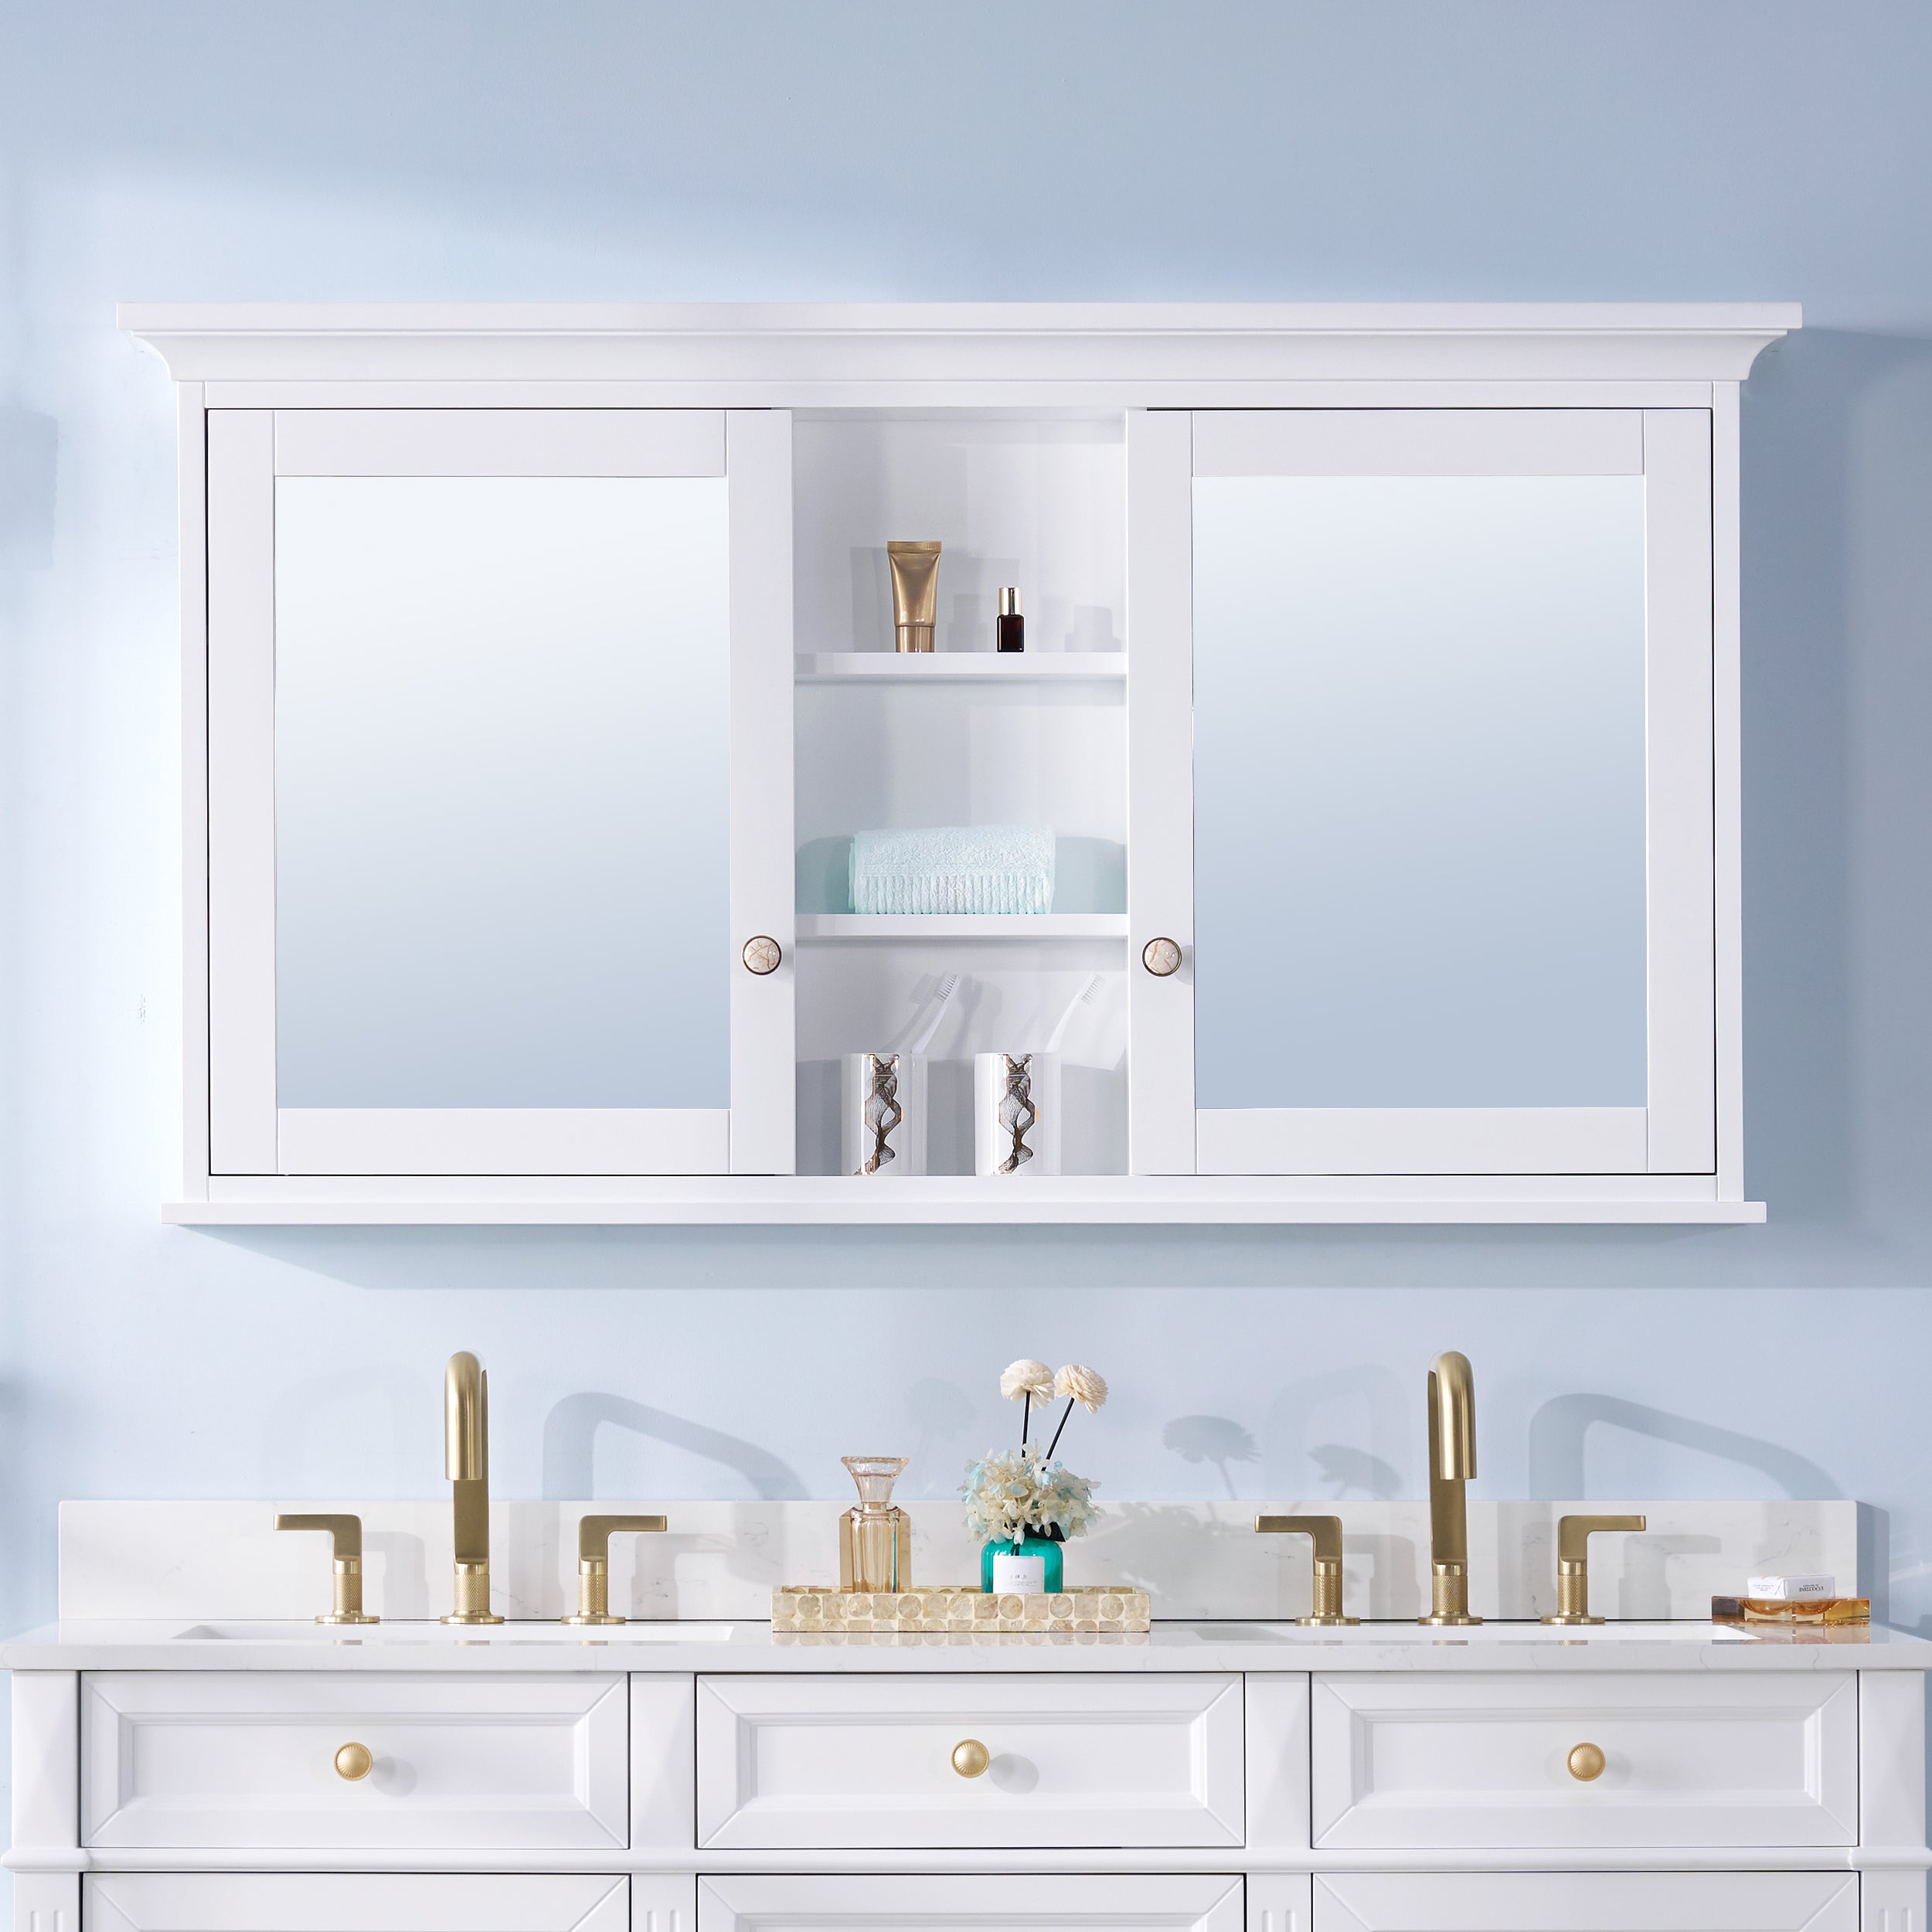 55 in.W x 30 in.H Surface-Mount Bathroom Medicine Cabinet with Mirror in White